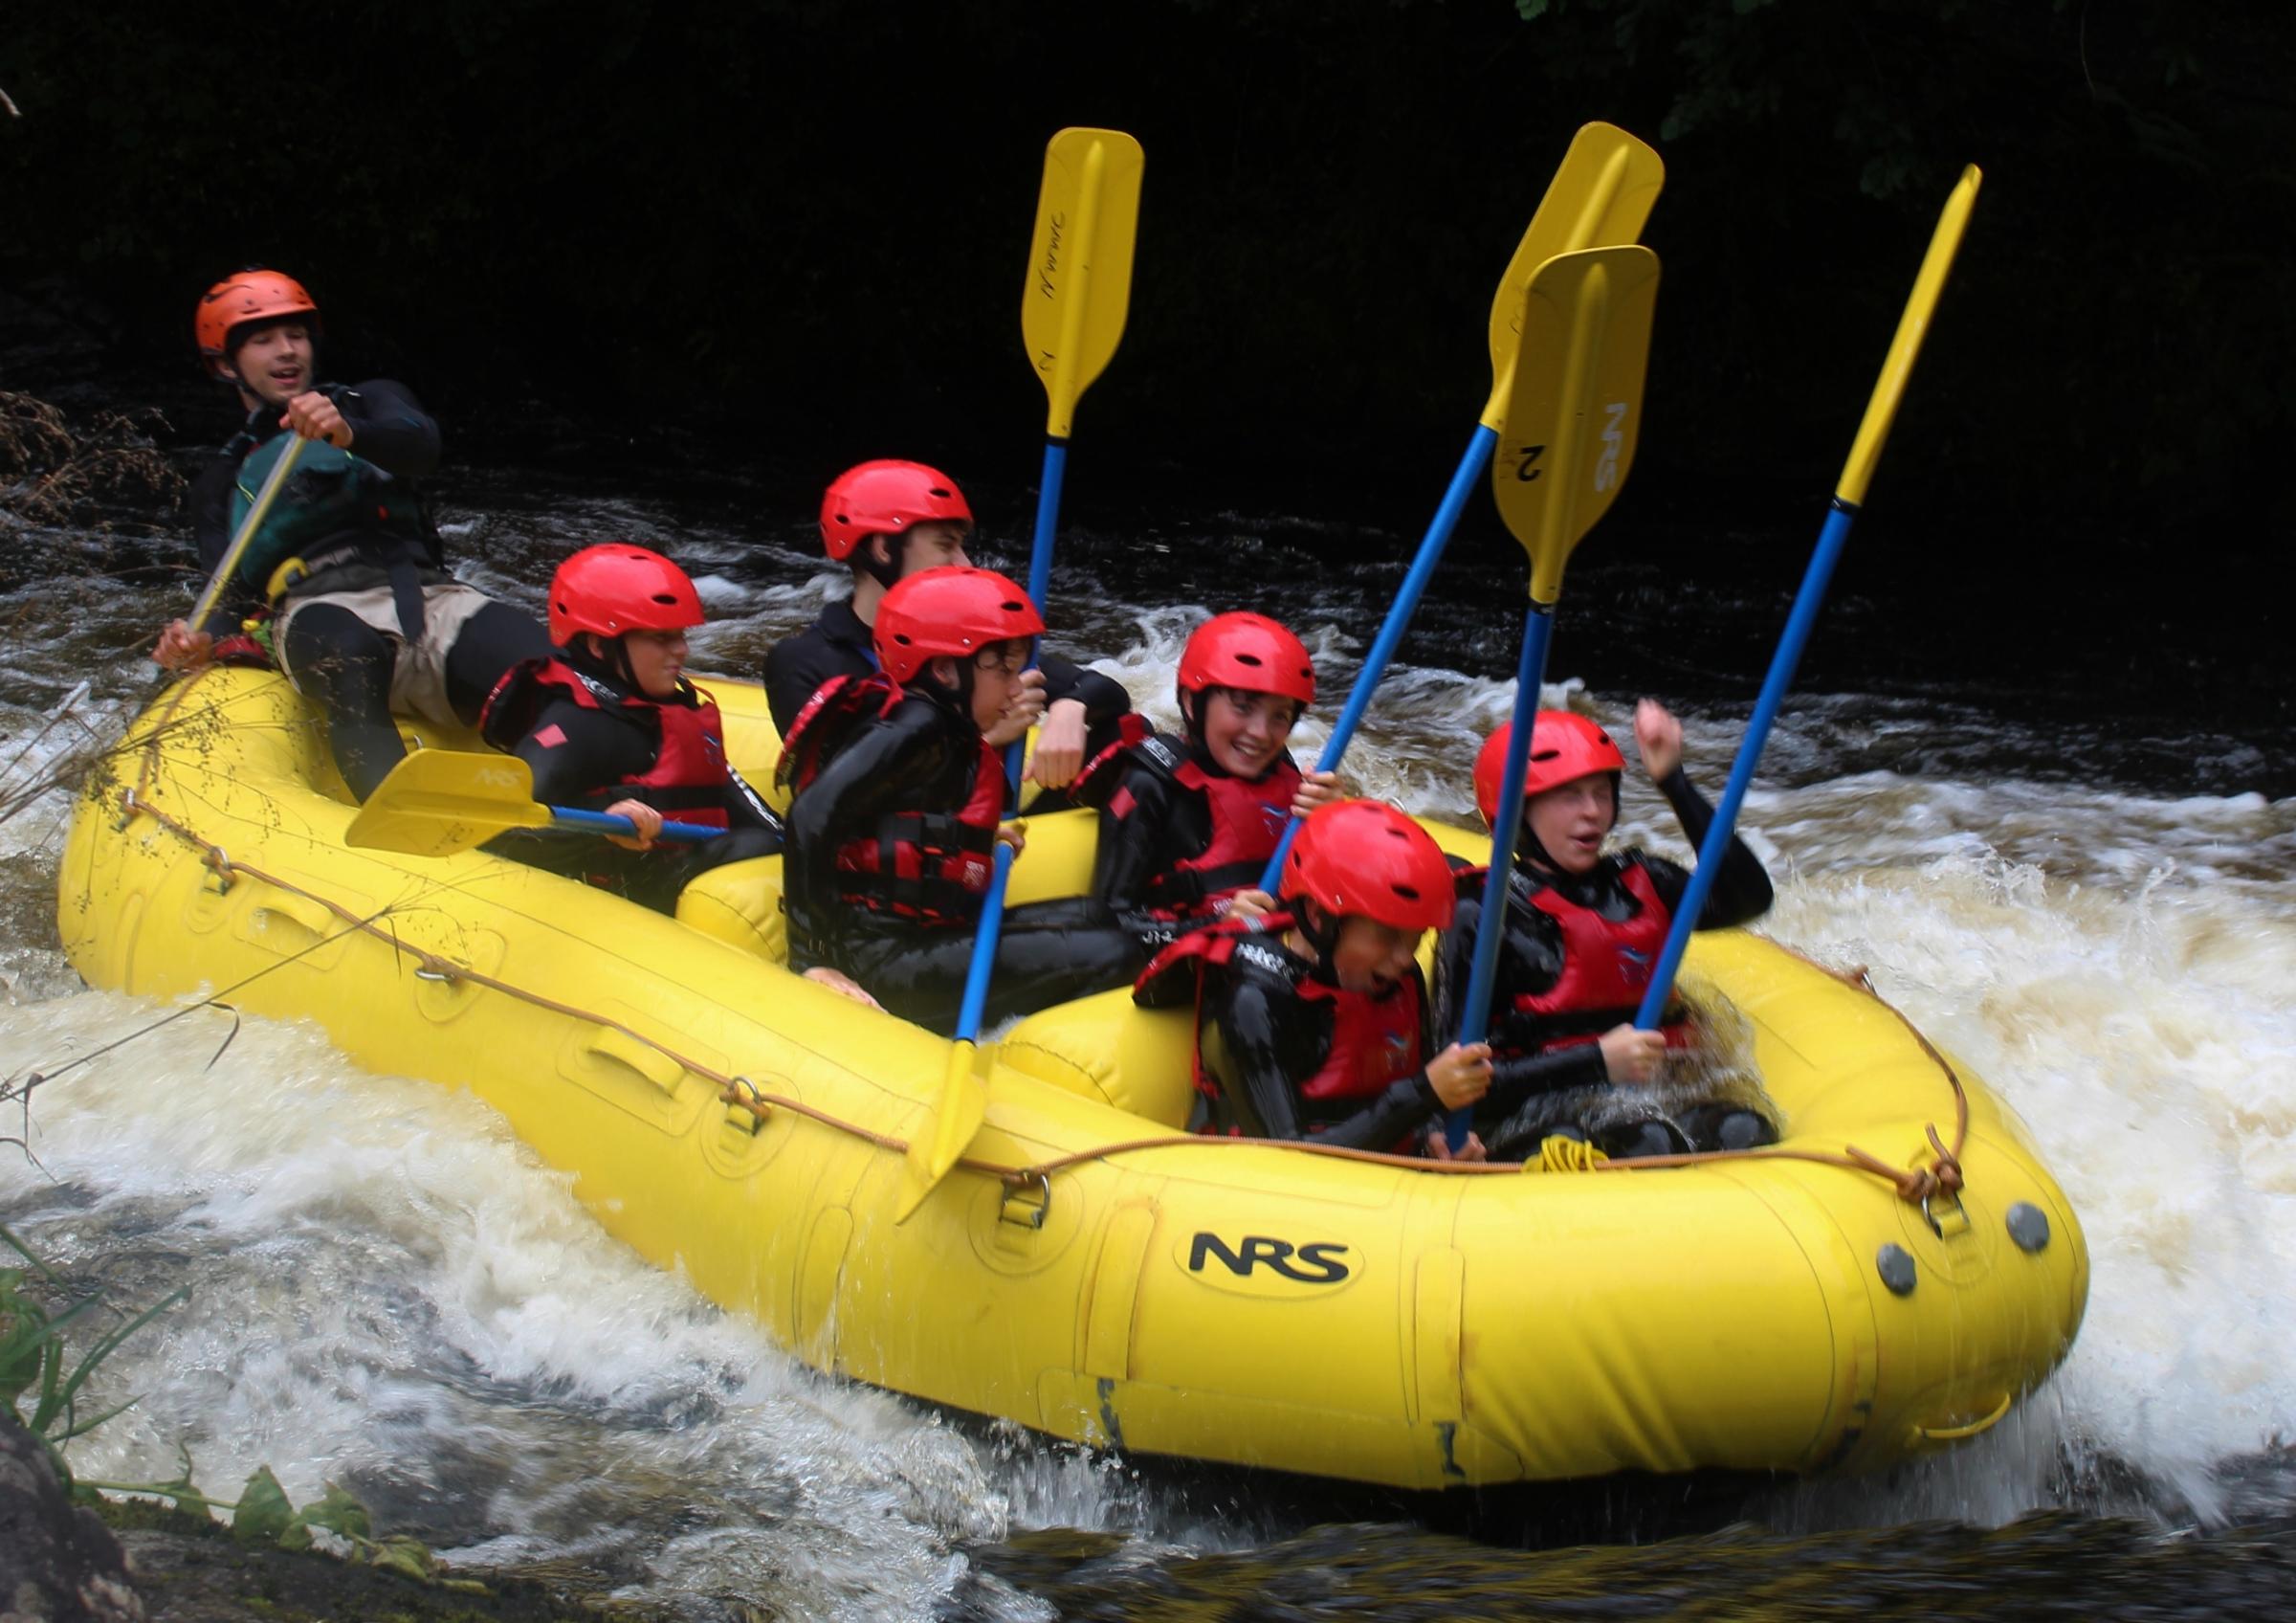 The group in full flow on the rapids.